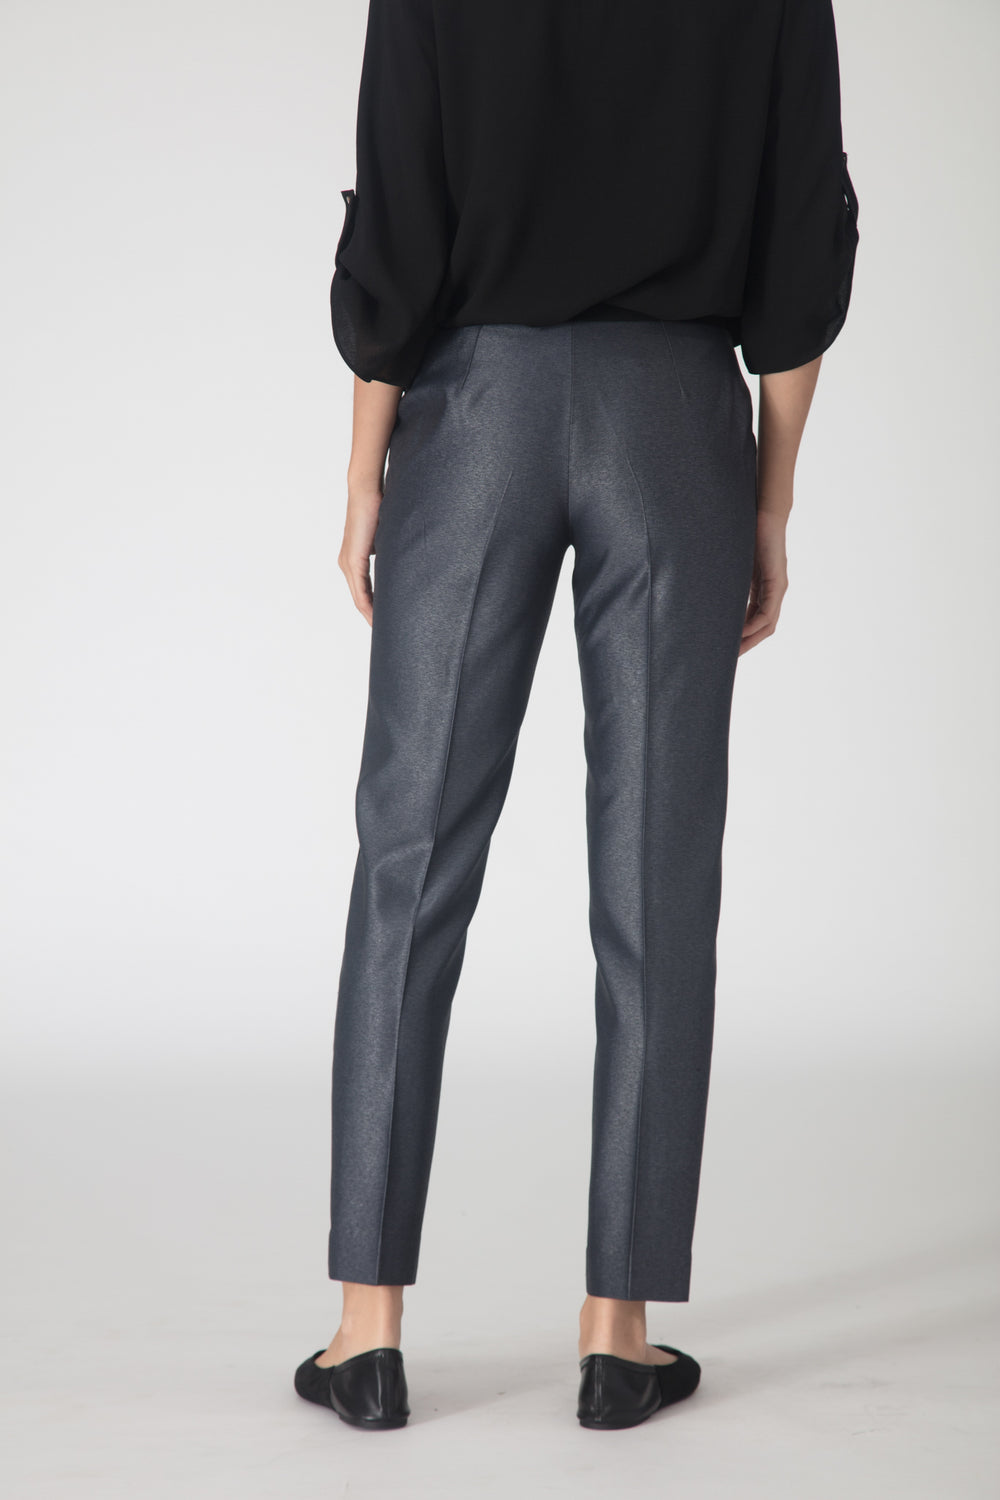 Grey Contrast Trousers